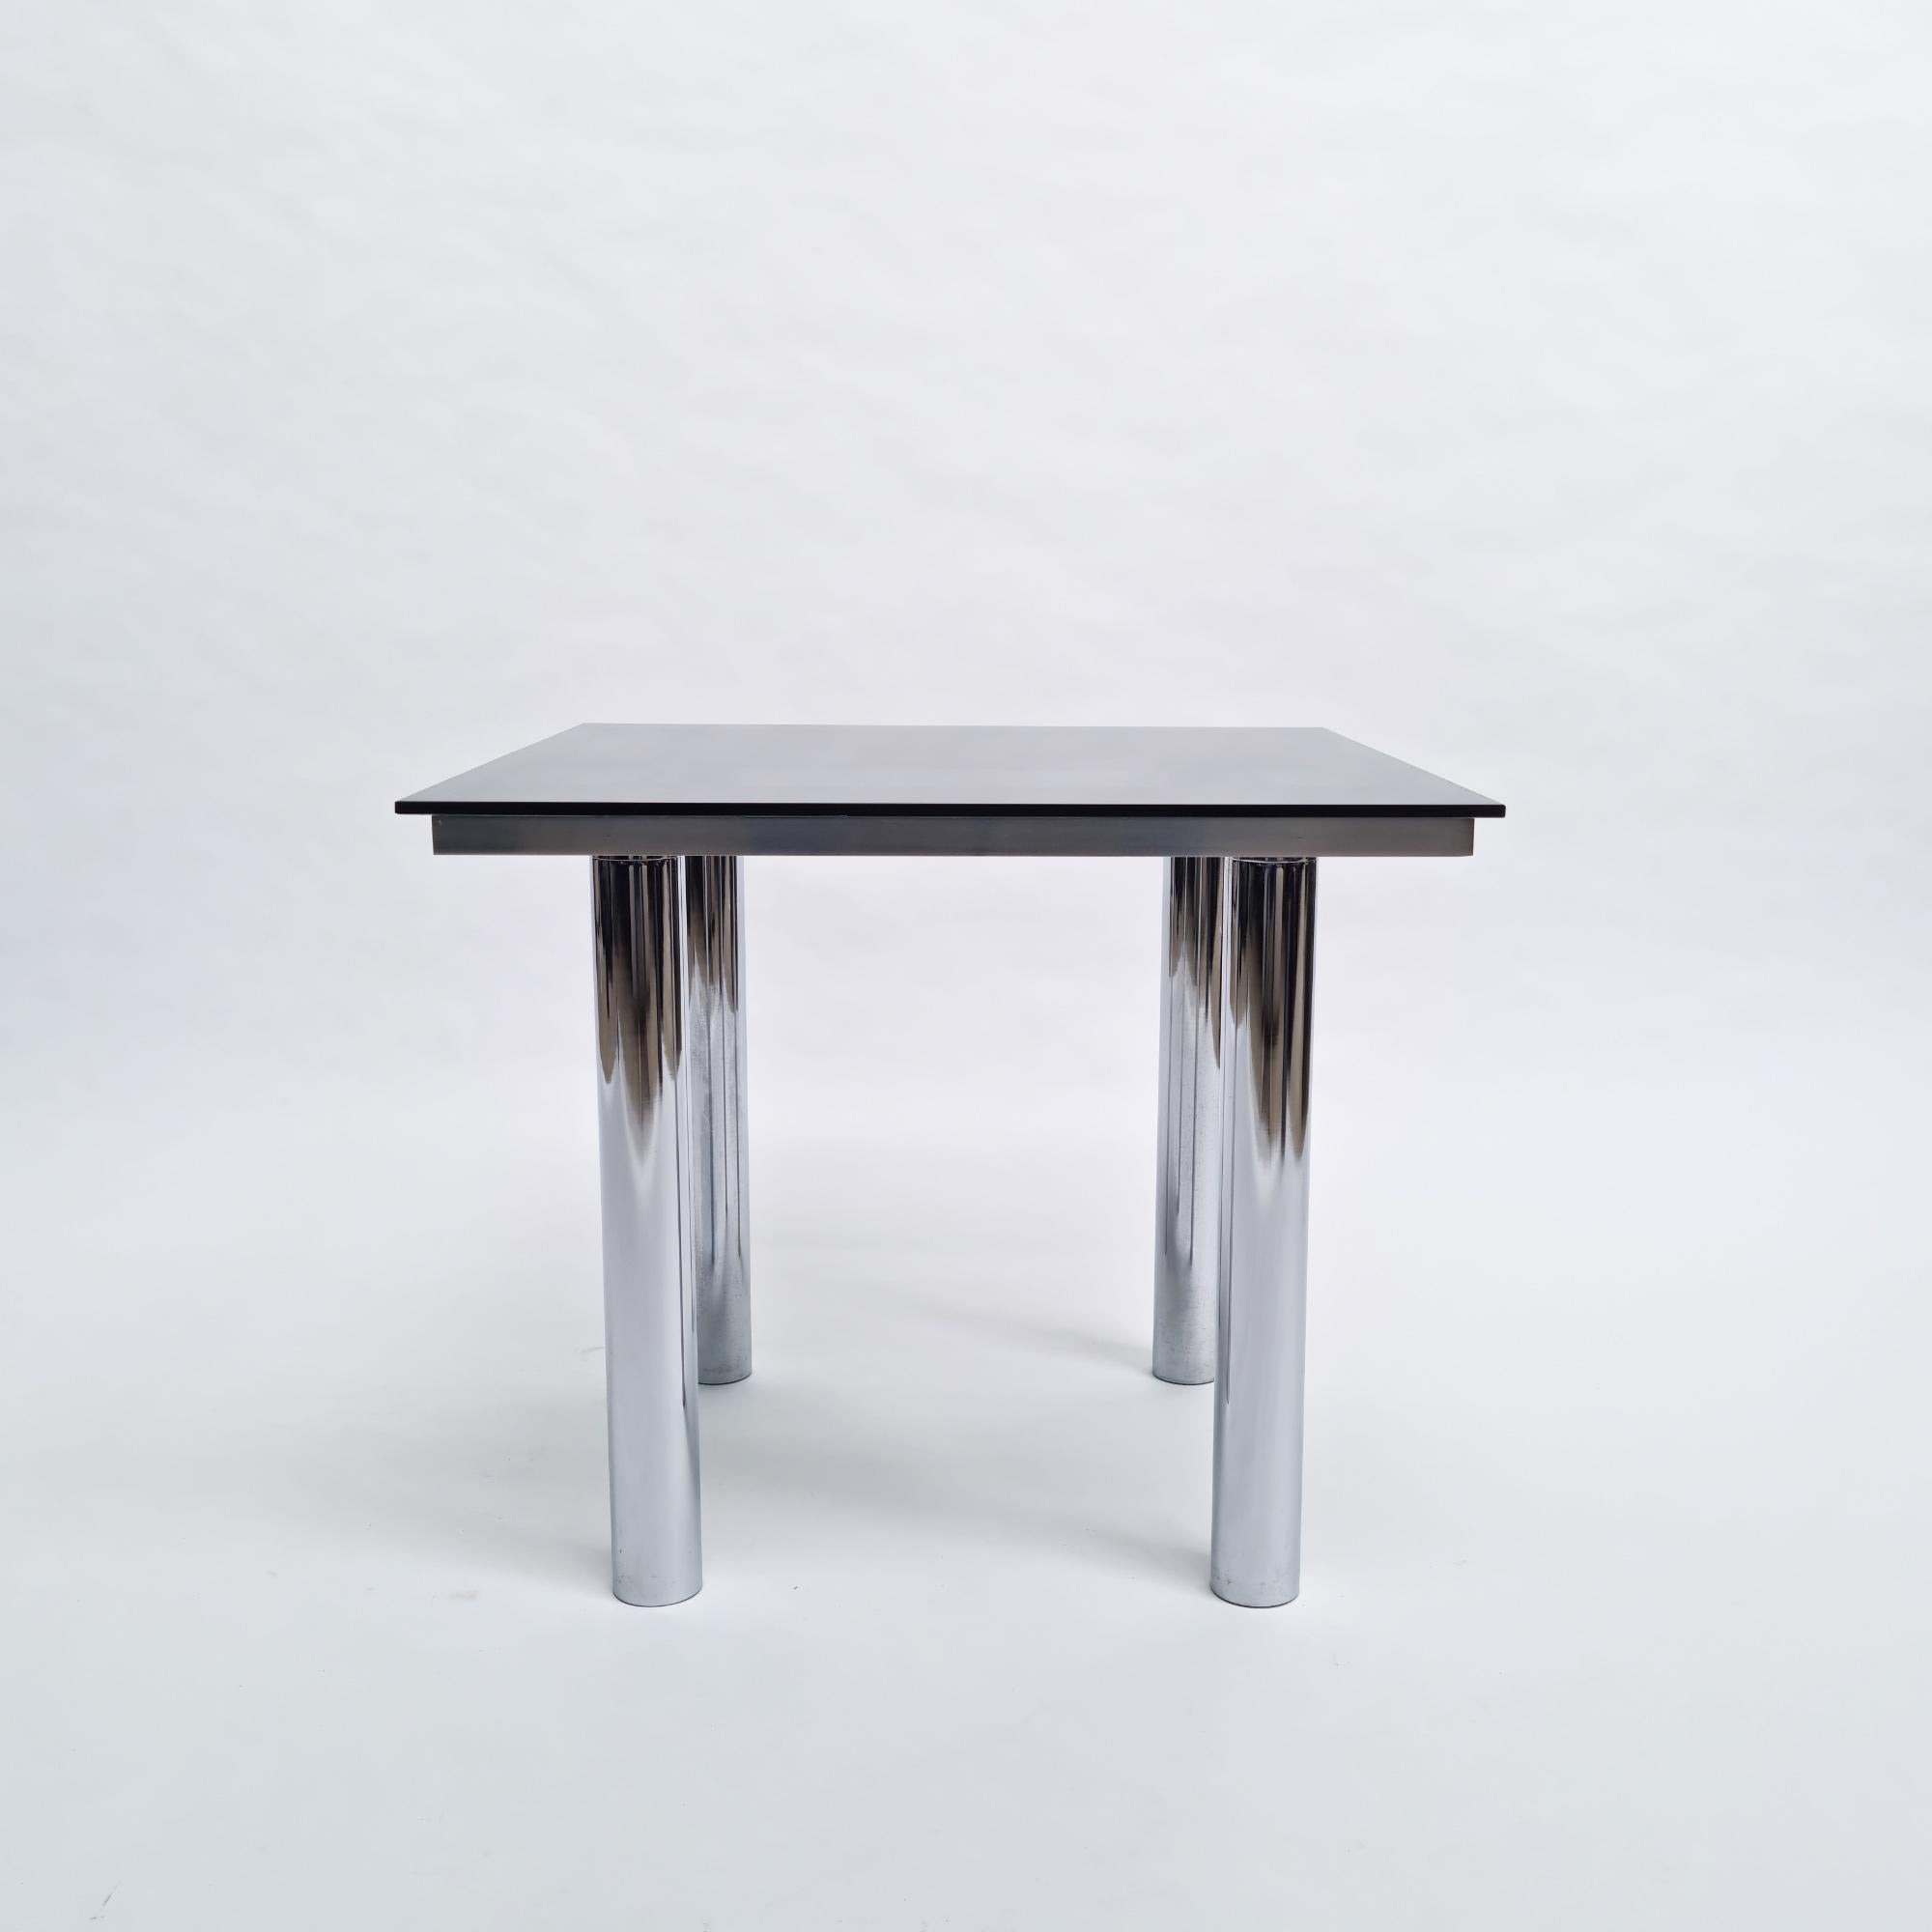 Side table model ‘André’ of 1969 created by Tobia Scarpa and manufactured by Knoll International/De Coene. Chromed steel structure, adjustable legs, smoked glass.